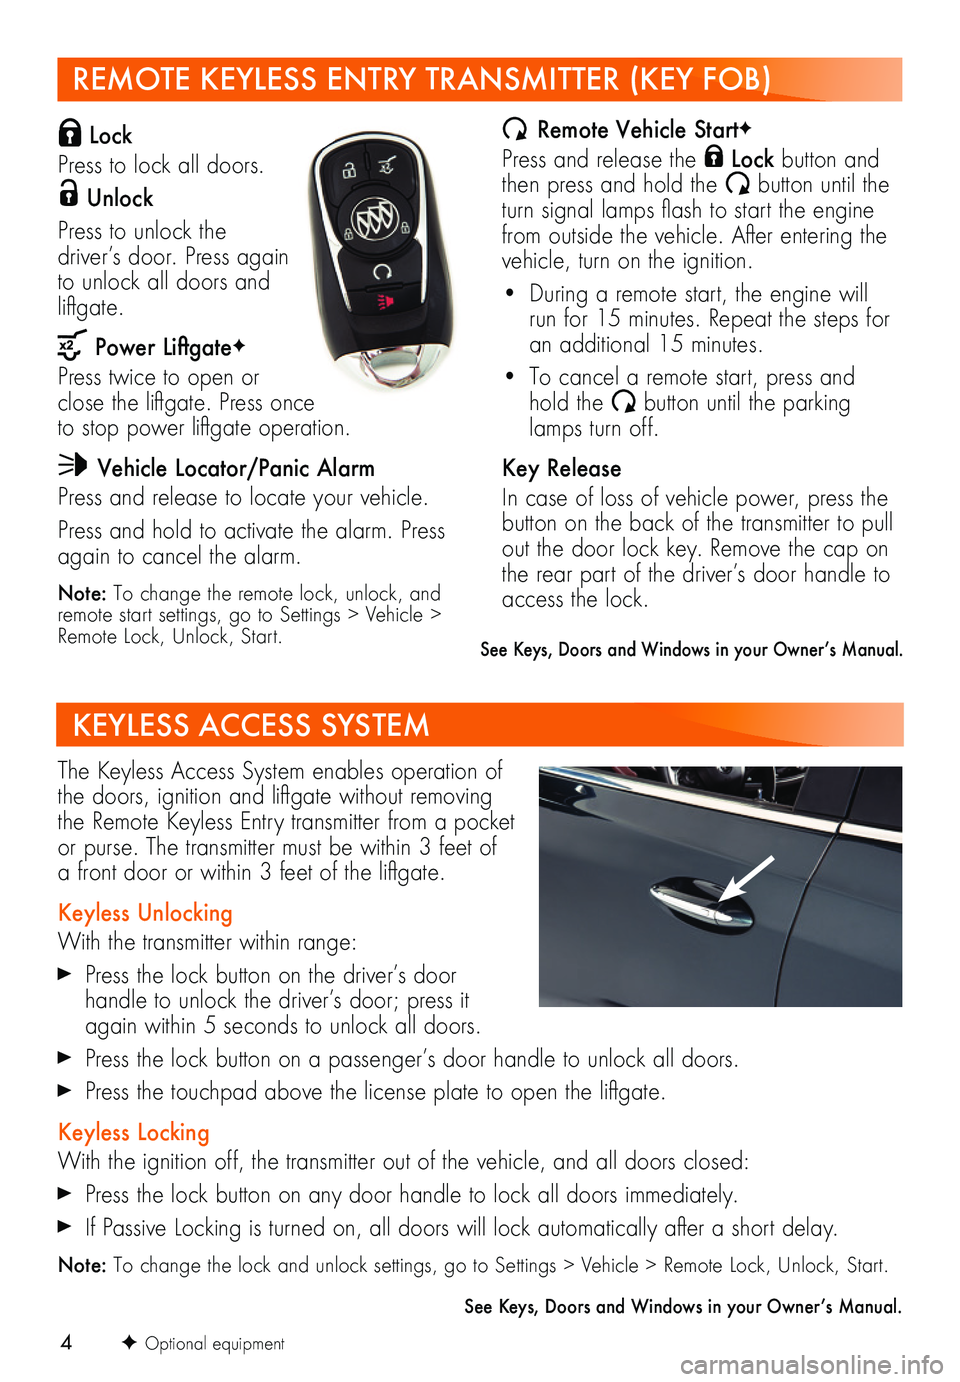 BUICK ENCLAVE 2019  Get To Know Guide 4
REMOTE KEYLESS ENTRY TRANSMITTER (KEY FOB) 
 Lock
Press to lock all doors.
 Unlock 
Press to unlock the  
driver’s door. Press again to unlock all doors and liftgate.
 Power LiftgateF
Press twice 